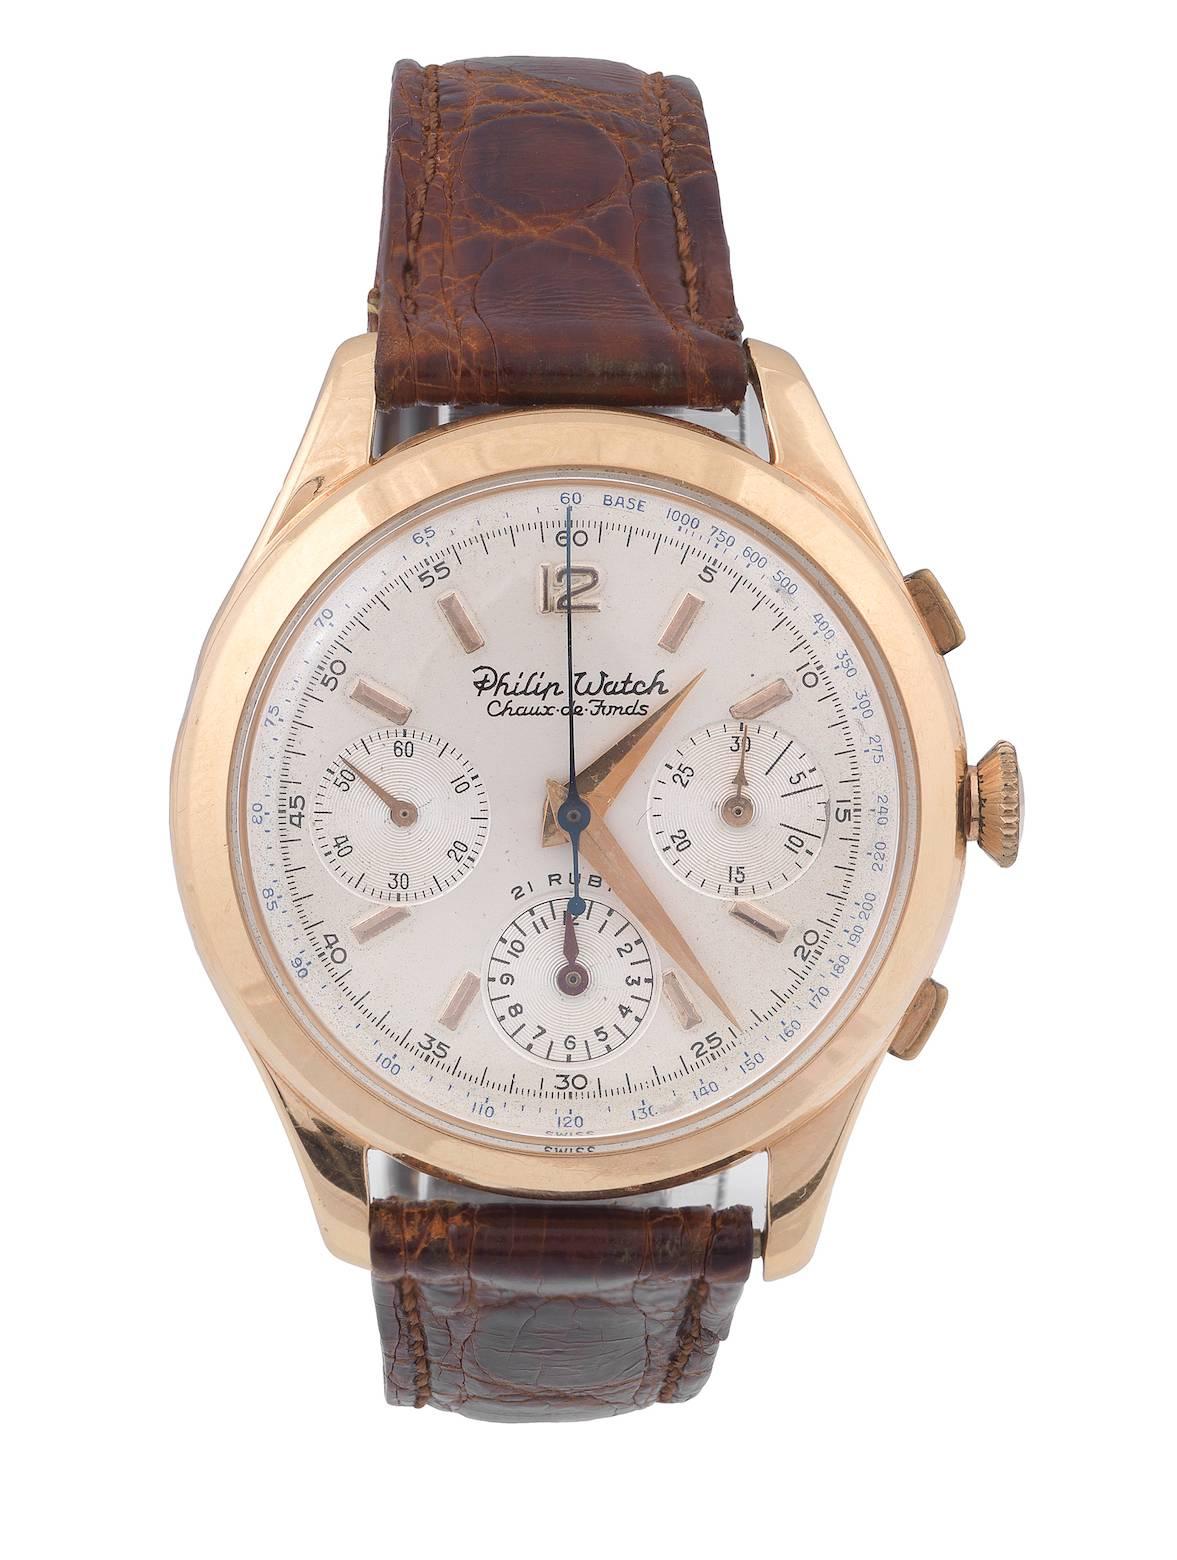 PLEASE NOTE: OUR PRICE IS FULLY INCLUSIVE OF SHIPPING, IMPORTATION TAXES & DUTIES.

Made in 1970’s.

Valjoux 72 manual 21 jewels wind movement. With square button chronograph, register and tachometer.

18Kt gold case three-body, polished, curved